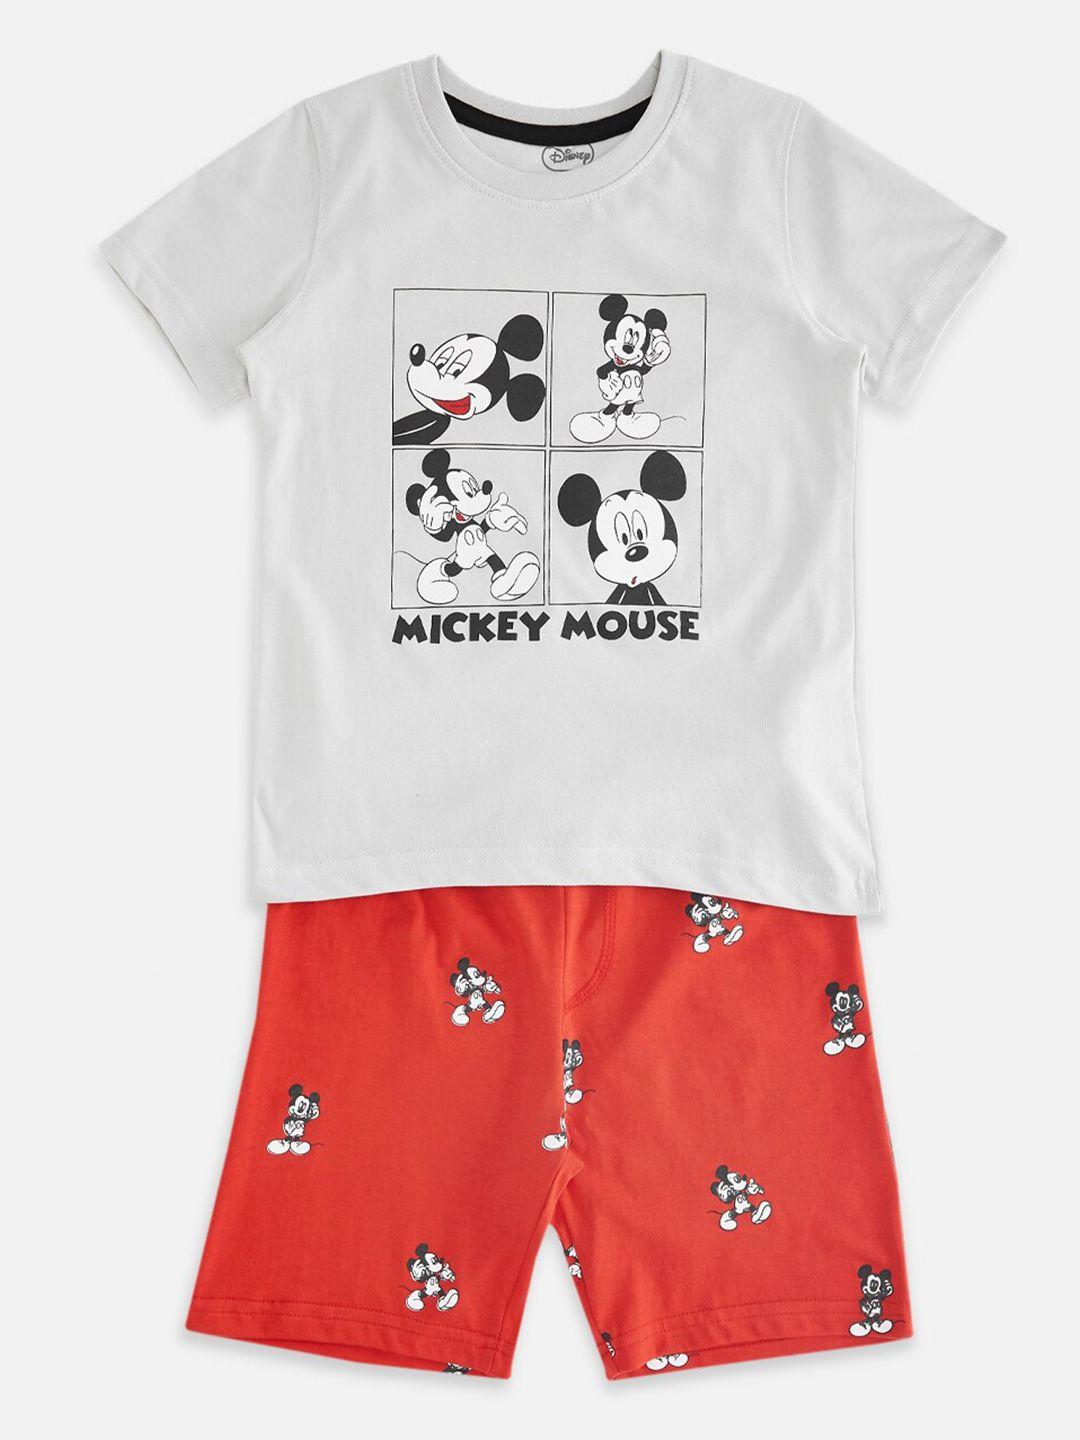 pantaloons junior boys mickey mouse printed pure cotton t-shirt with shorts